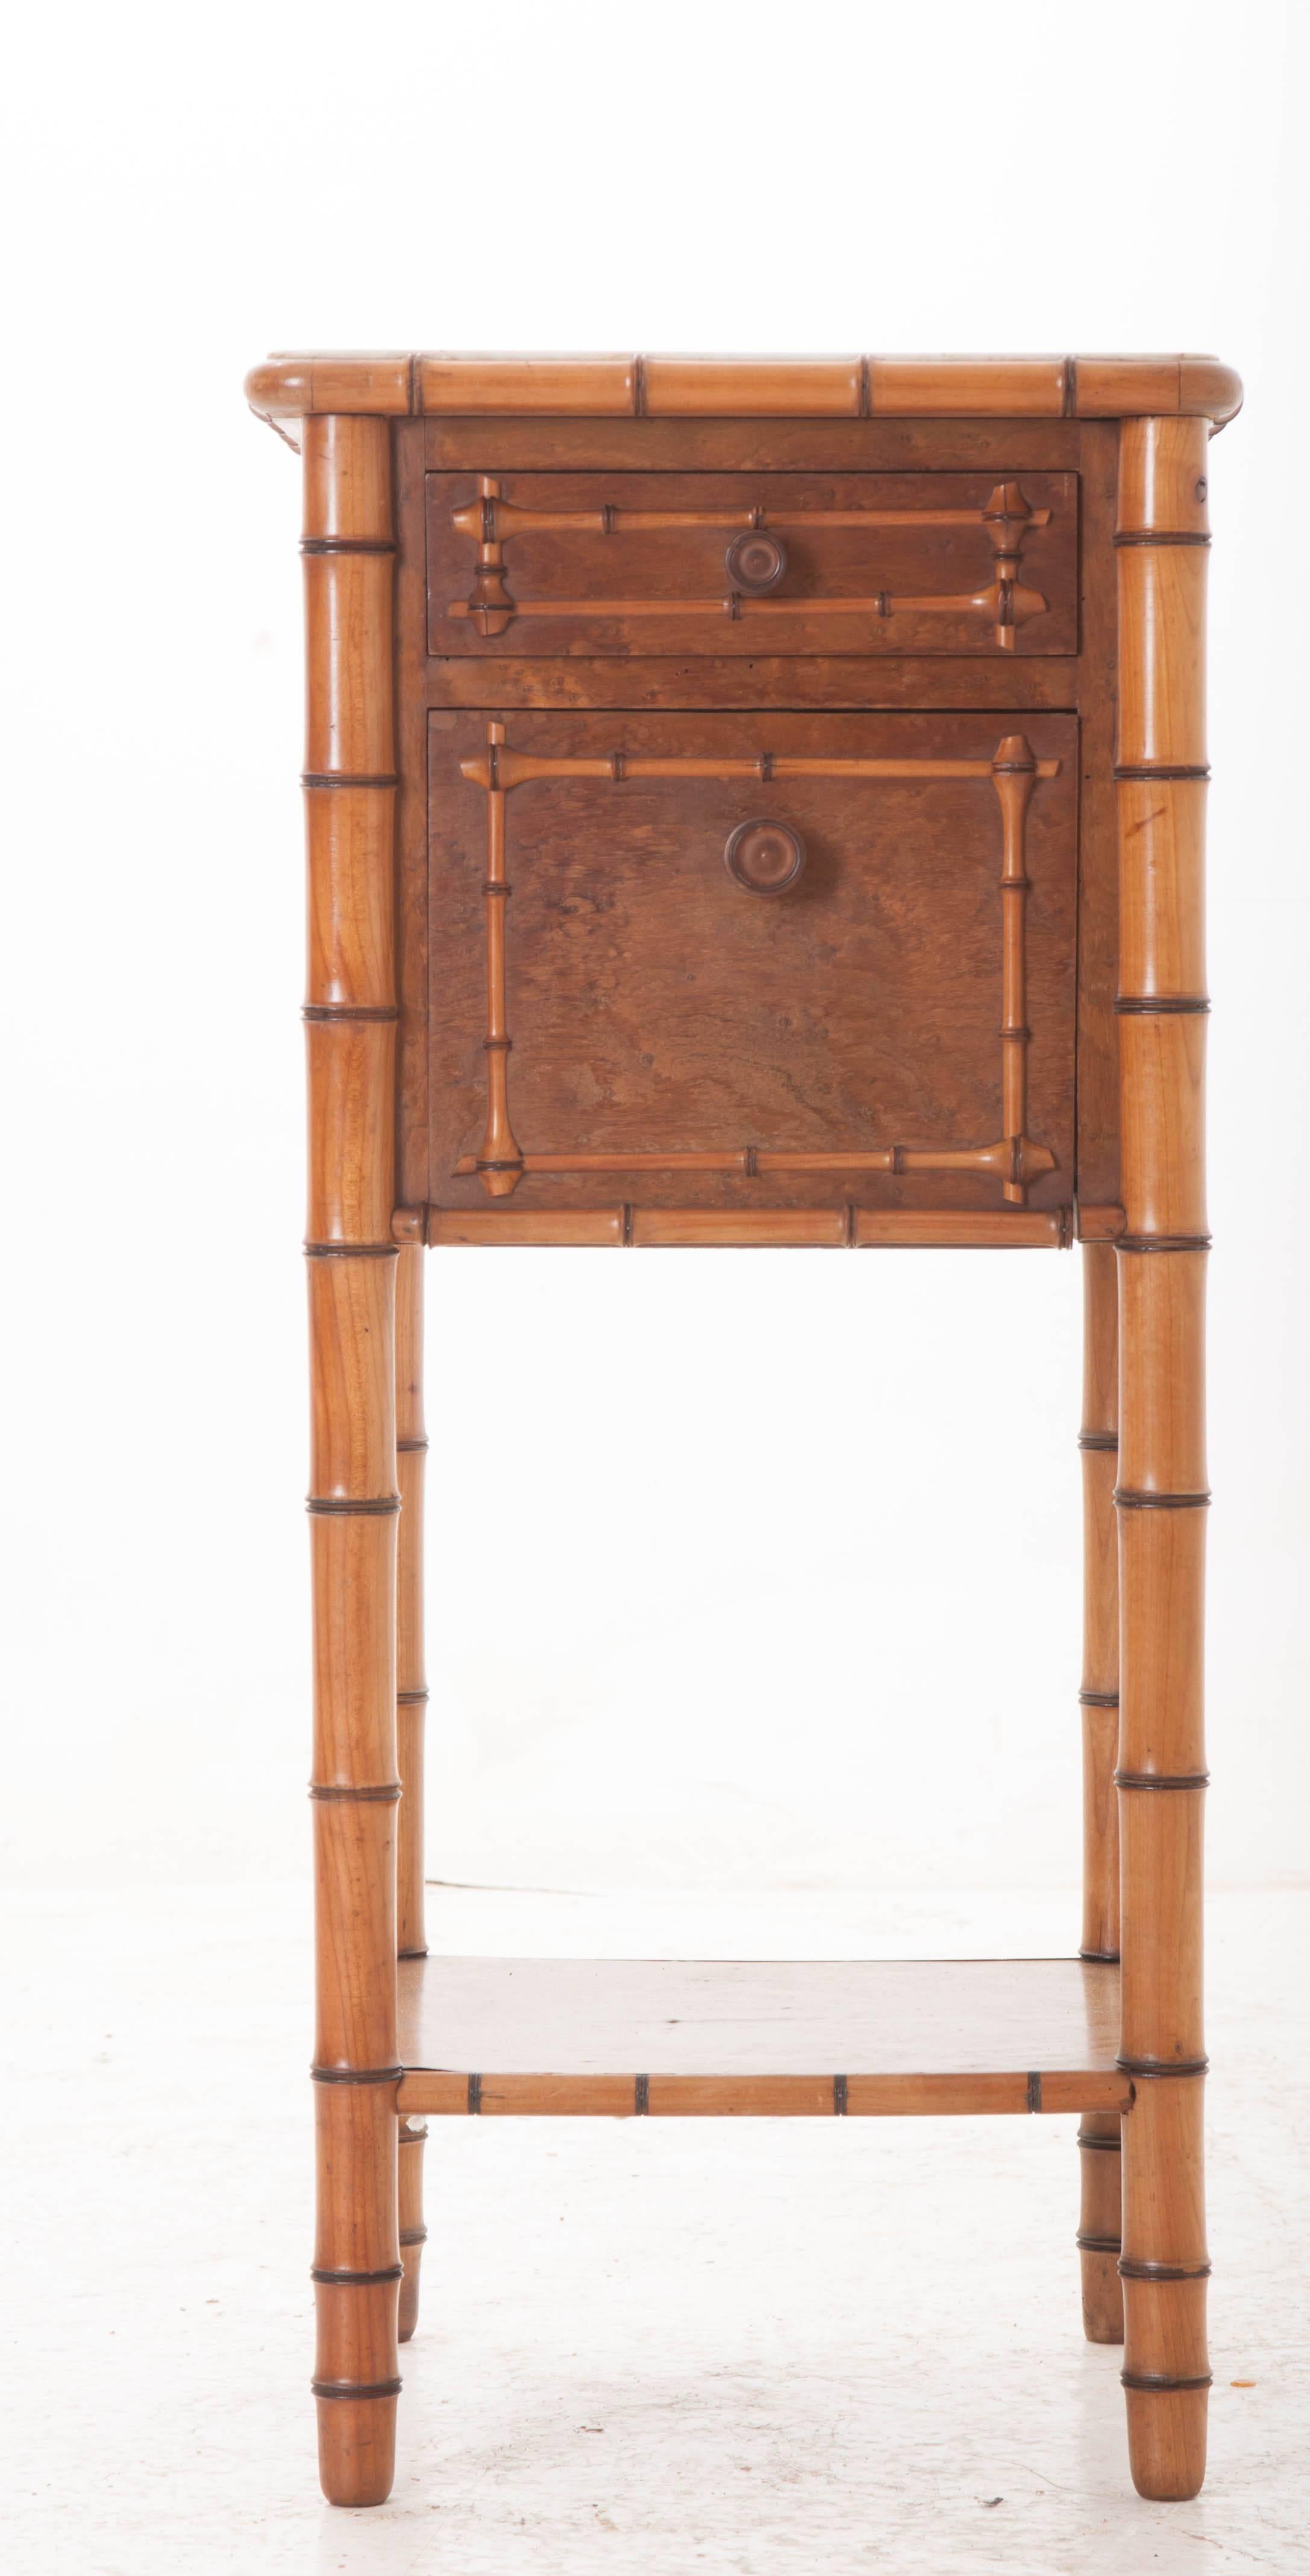 A fantastic carved faux bamboo bedside table with white marble top from 19th century France. A single drawer can be found above the door, both embellished with carved, crossed bamboo trim. The door conceals a marble lined interior cavity. Both the